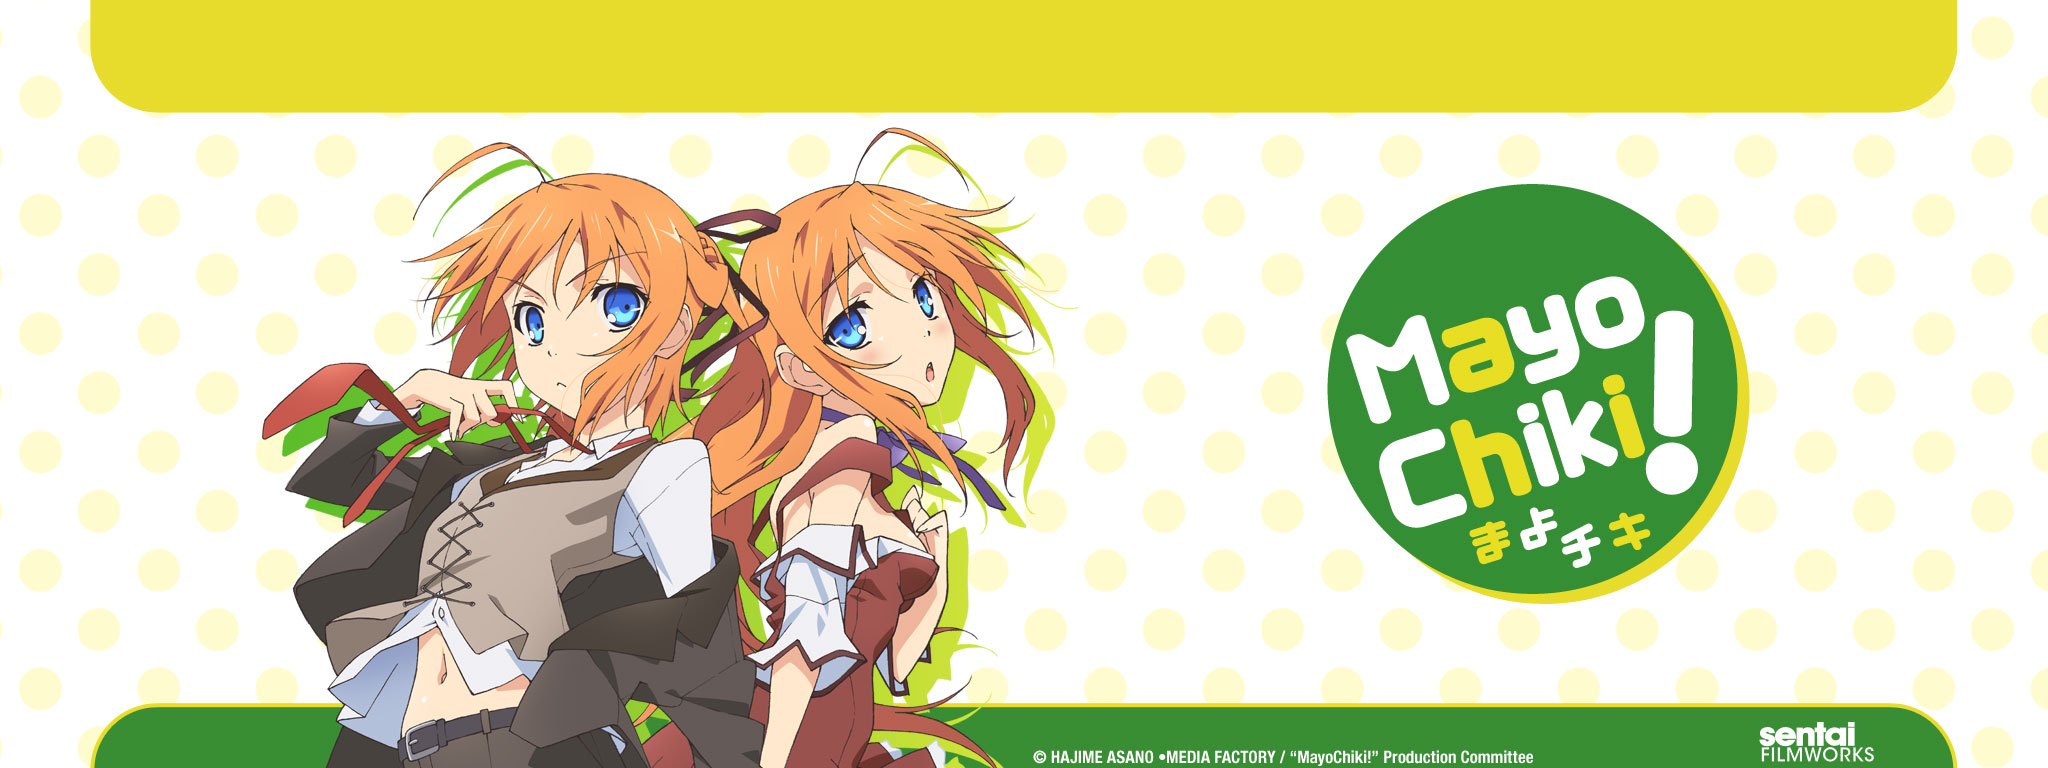 Title Art for Mayo Chiki!